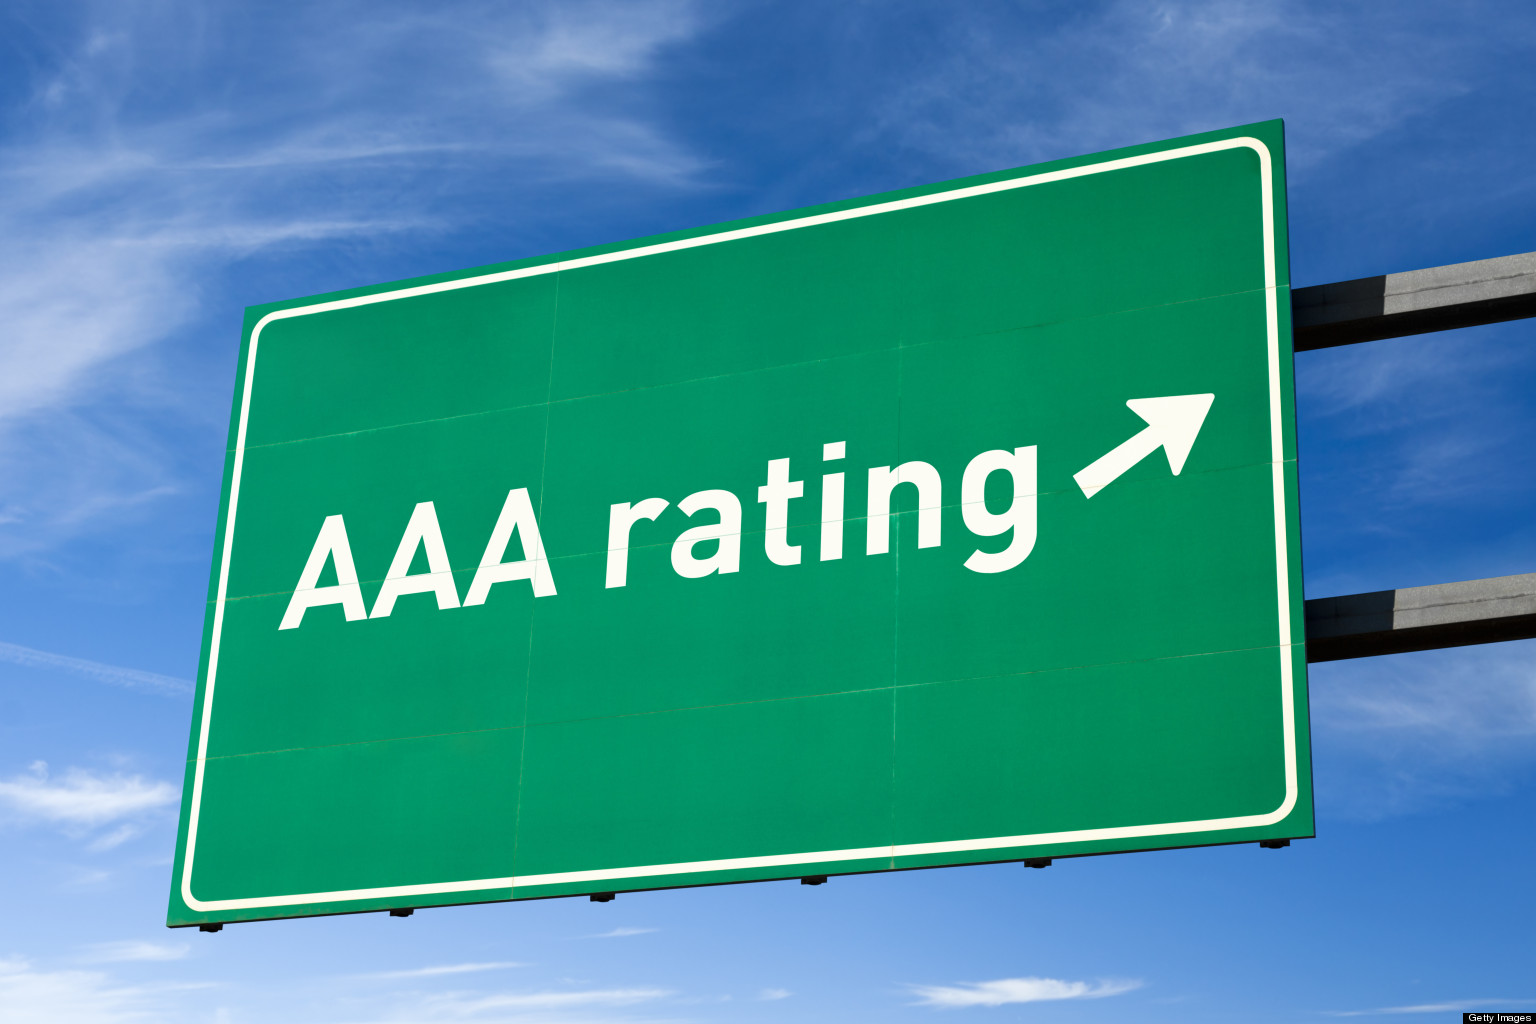 B.C.'s Credit Rating Steady At AA Says Dominion